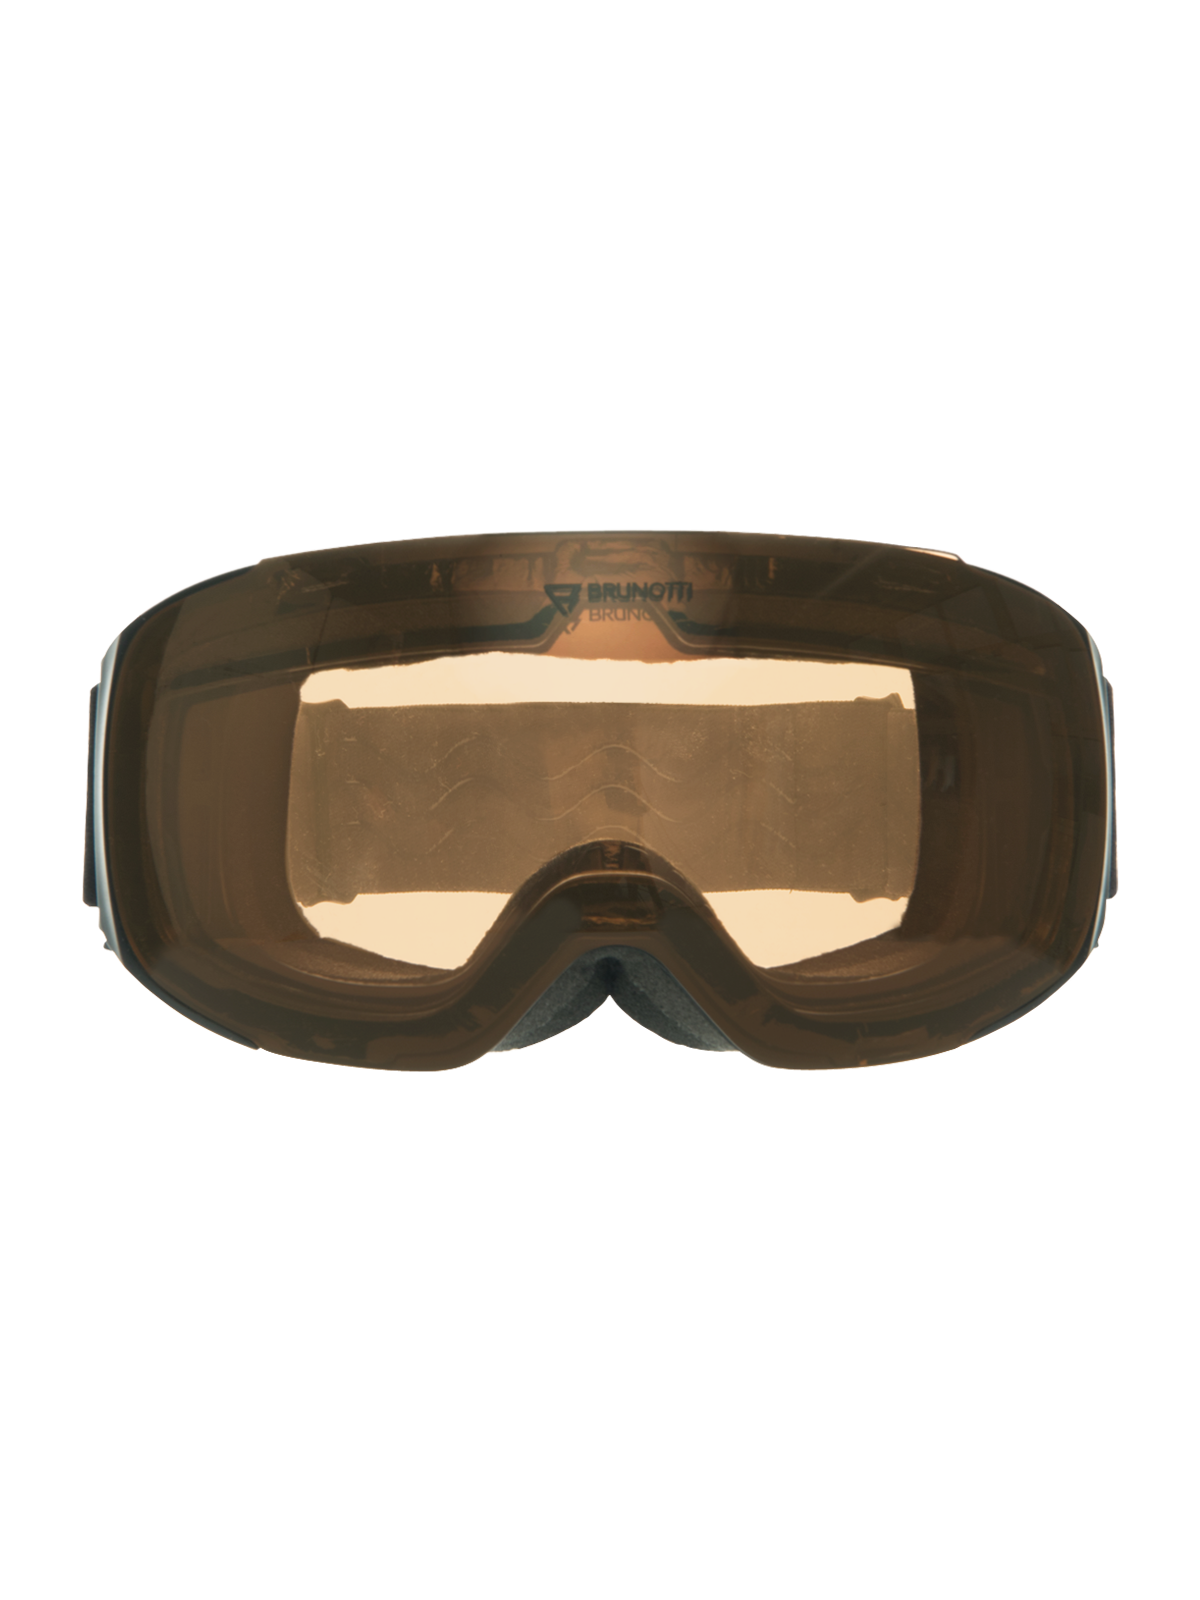 Timber Snow Goggles with exchangeable lenses | Black